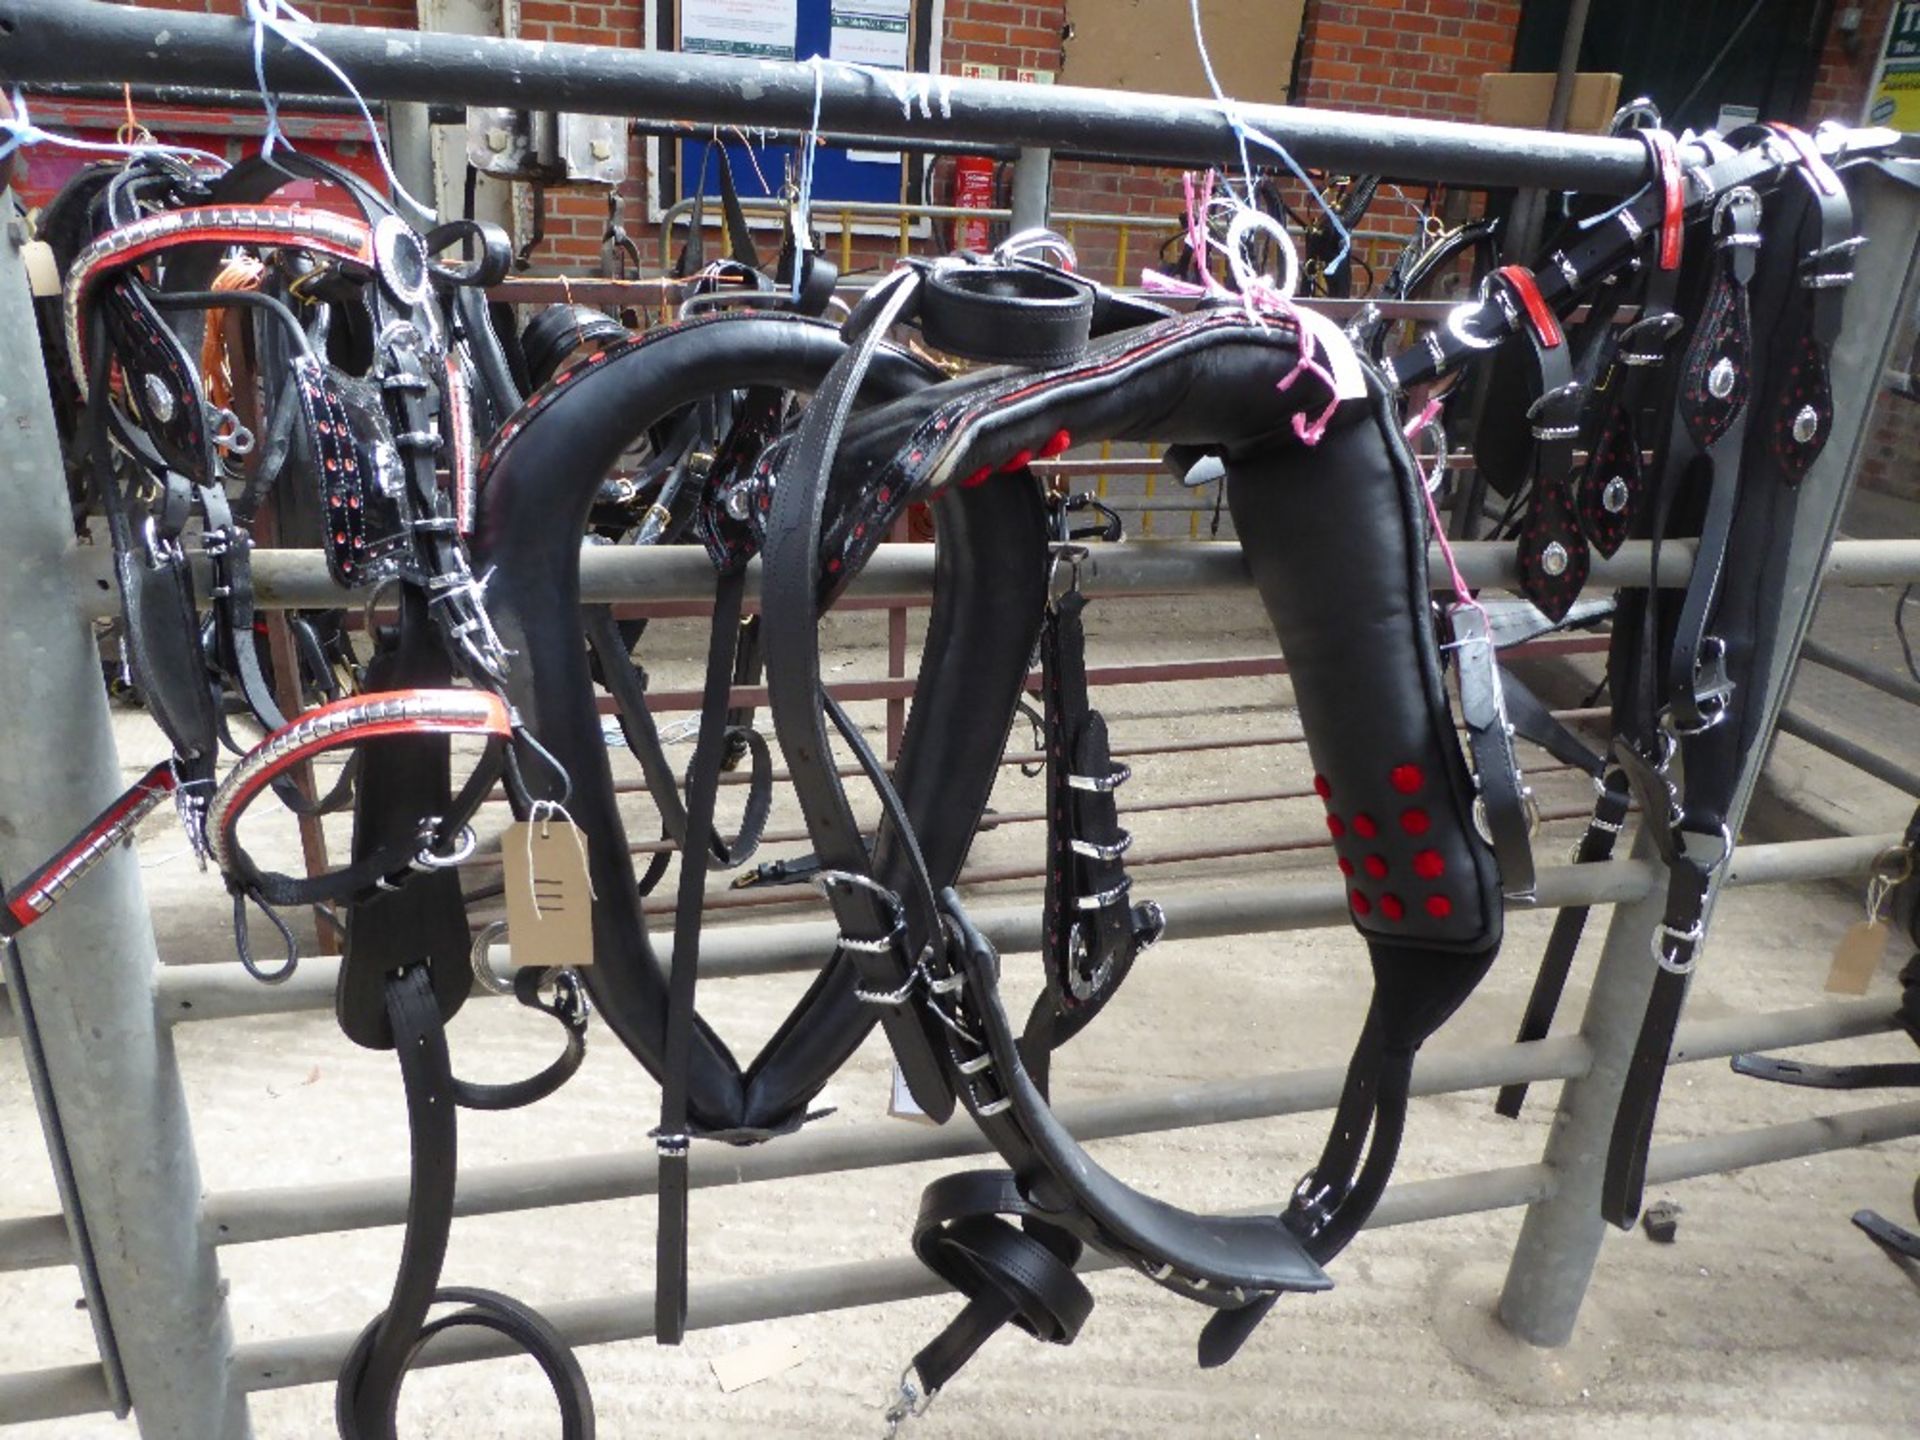 Set of black/red trade harness with white metal horseshoe fittings, 22ins collar - carries VAT